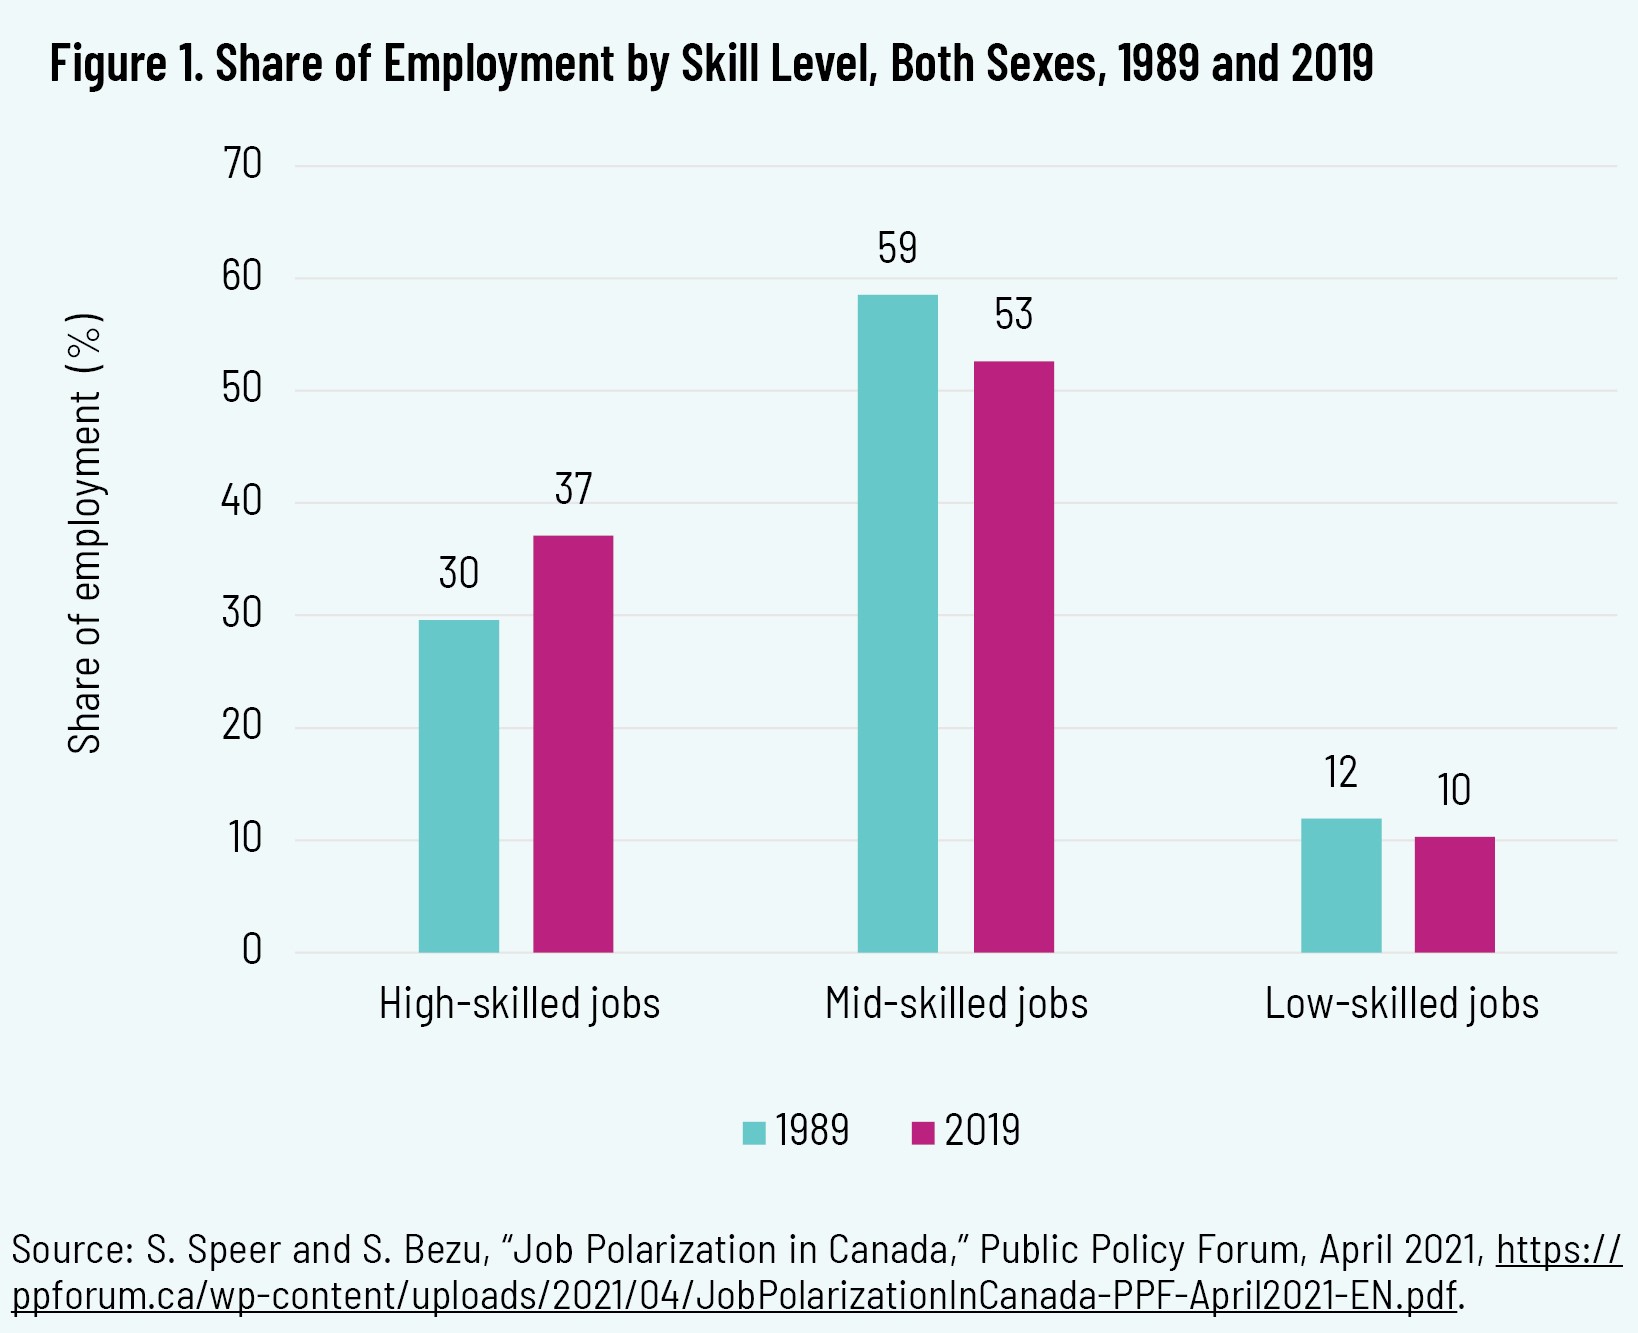 Figure 1. Share of Employment by Skill Level, Both Sexes, 1989 and 2019